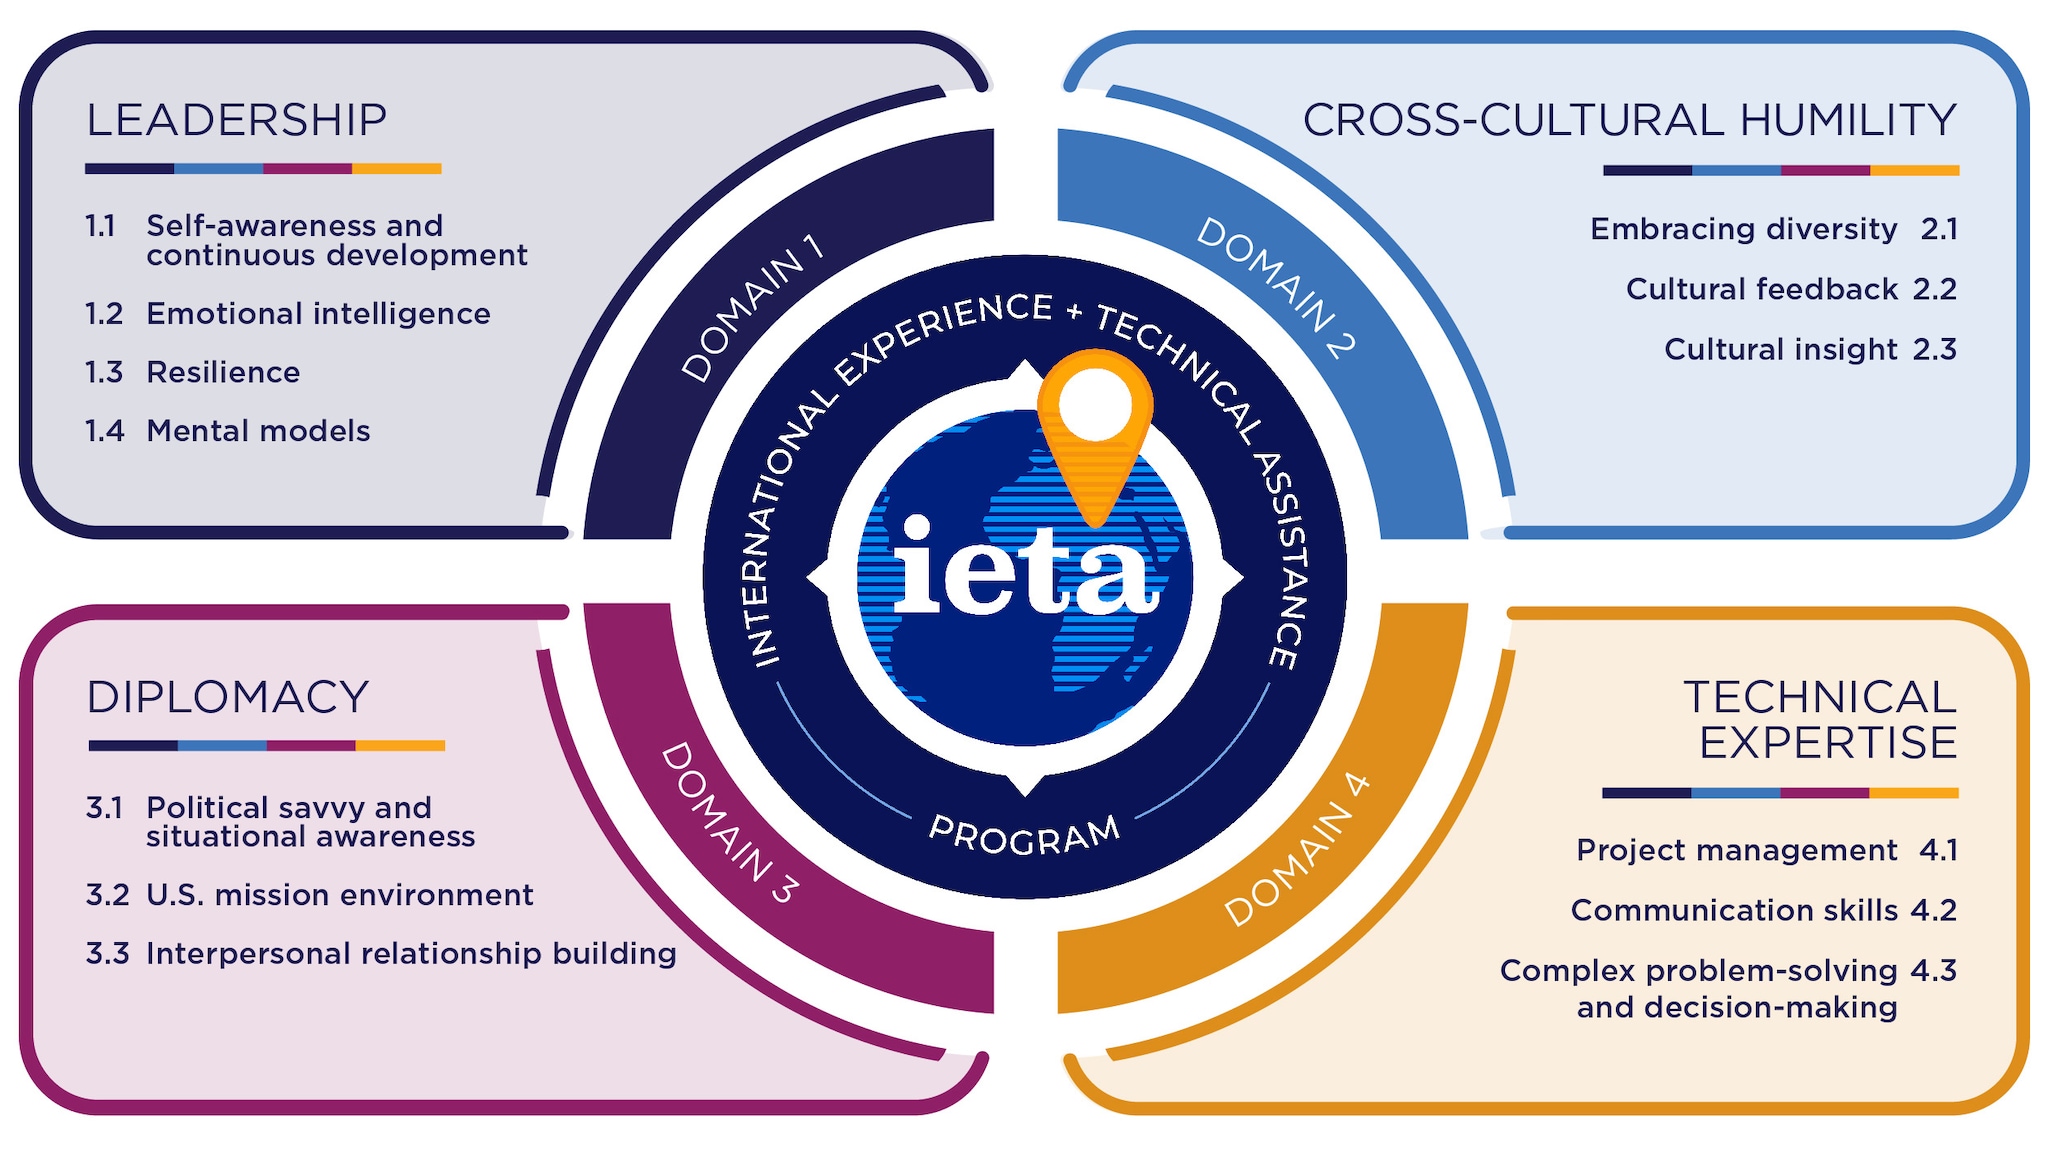 There is a circular graphic depicting the four domains of IETA. By each domain, there is a rounded rectangular box with the name and competencies. The four domains are: leadership, cross-cultural humility, diplomacy, and technical expertise